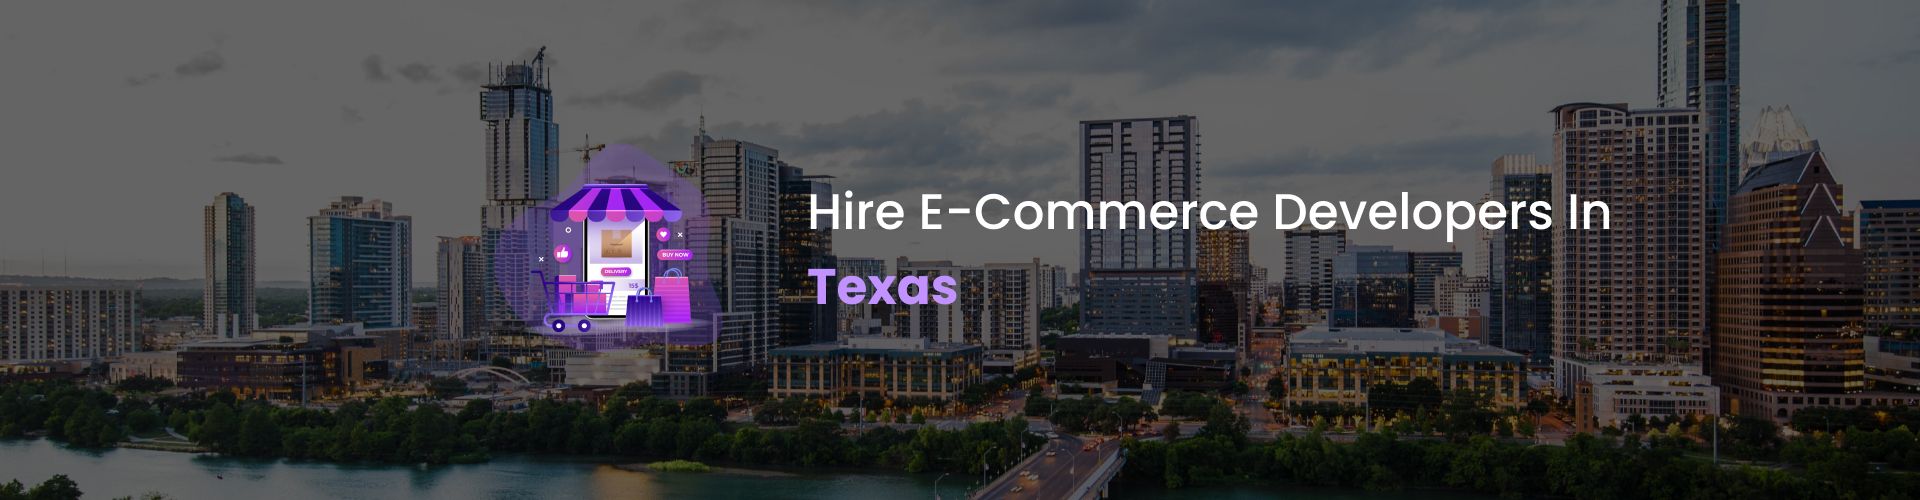 hire ecommerce developers in texas